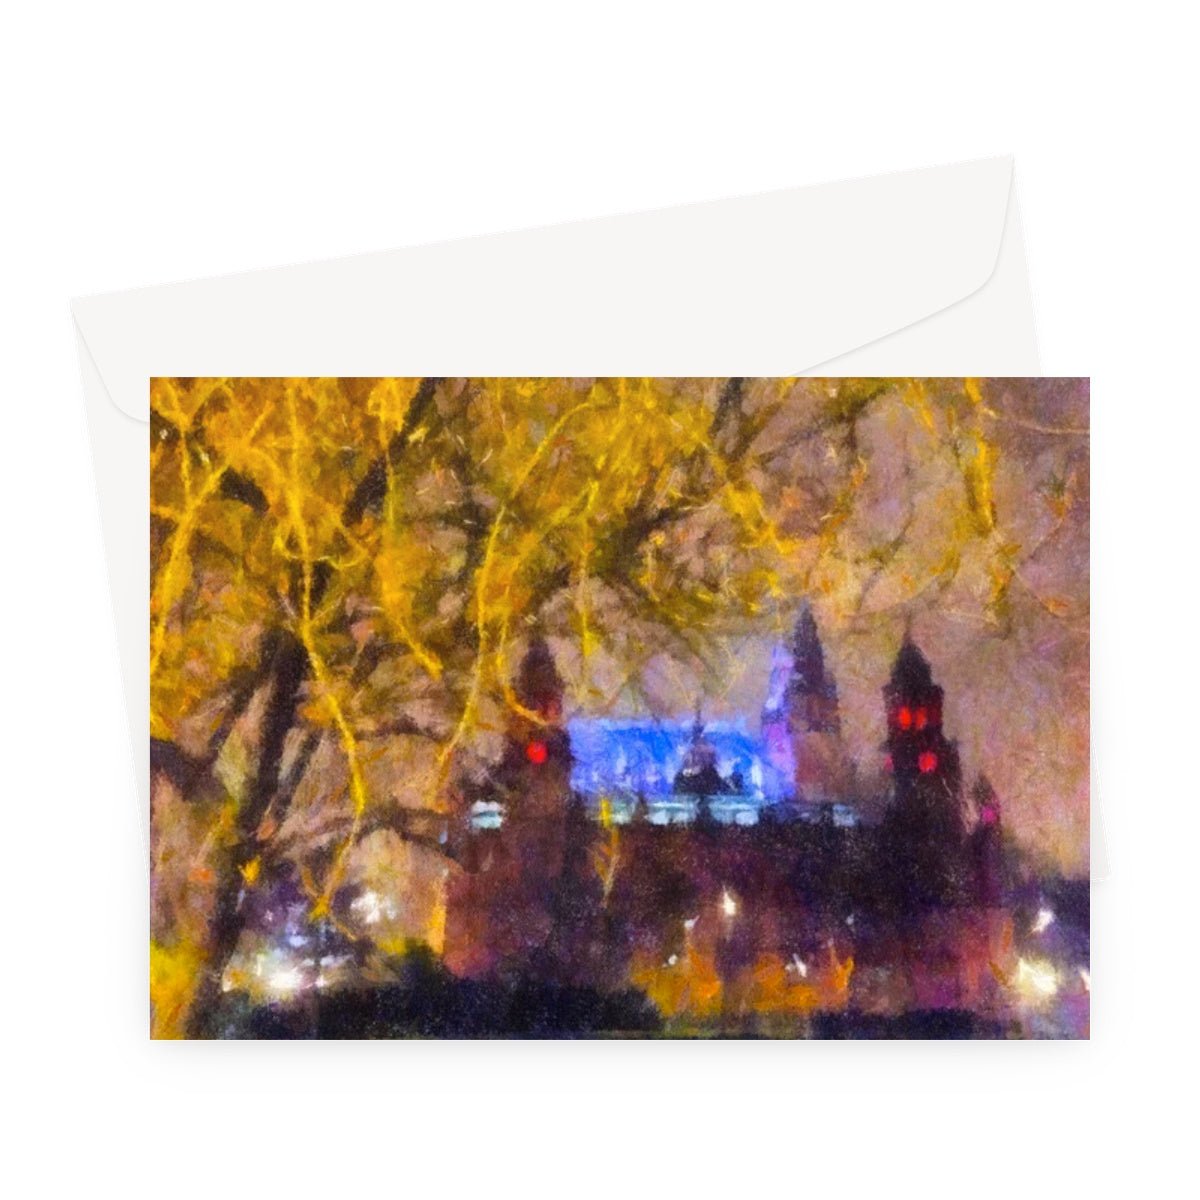 Kelvingrove Nights Glasgow Art Gifts Greeting Card-Greetings Cards-Edinburgh & Glasgow Art Gallery-A5 Landscape-1 Card-Paintings, Prints, Homeware, Art Gifts From Scotland By Scottish Artist Kevin Hunter